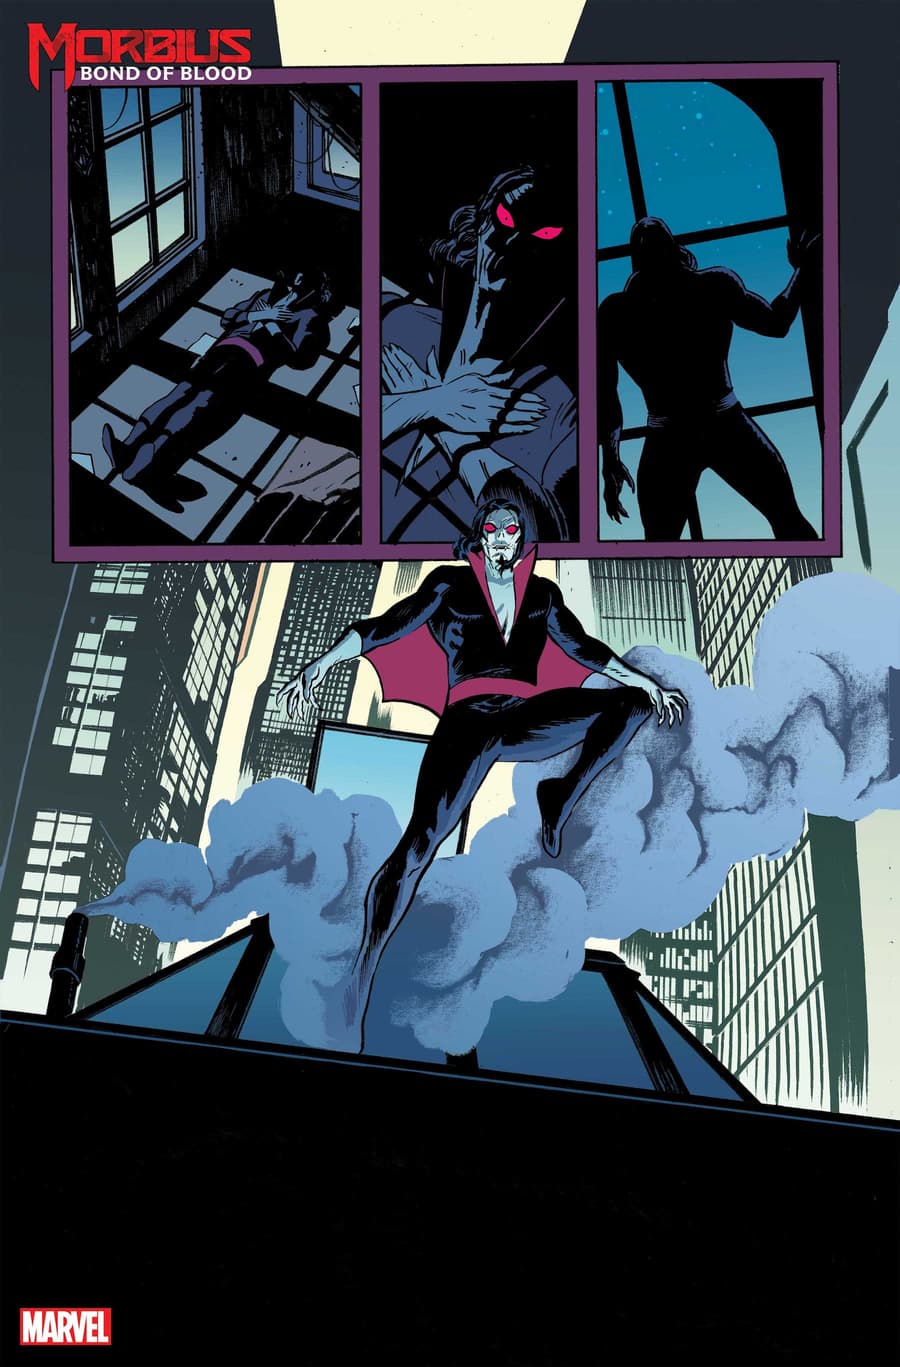 MORBIUS: BOND OF BLOOD #1 preview art by Tom Reilly with colors by Chris O’Halloran